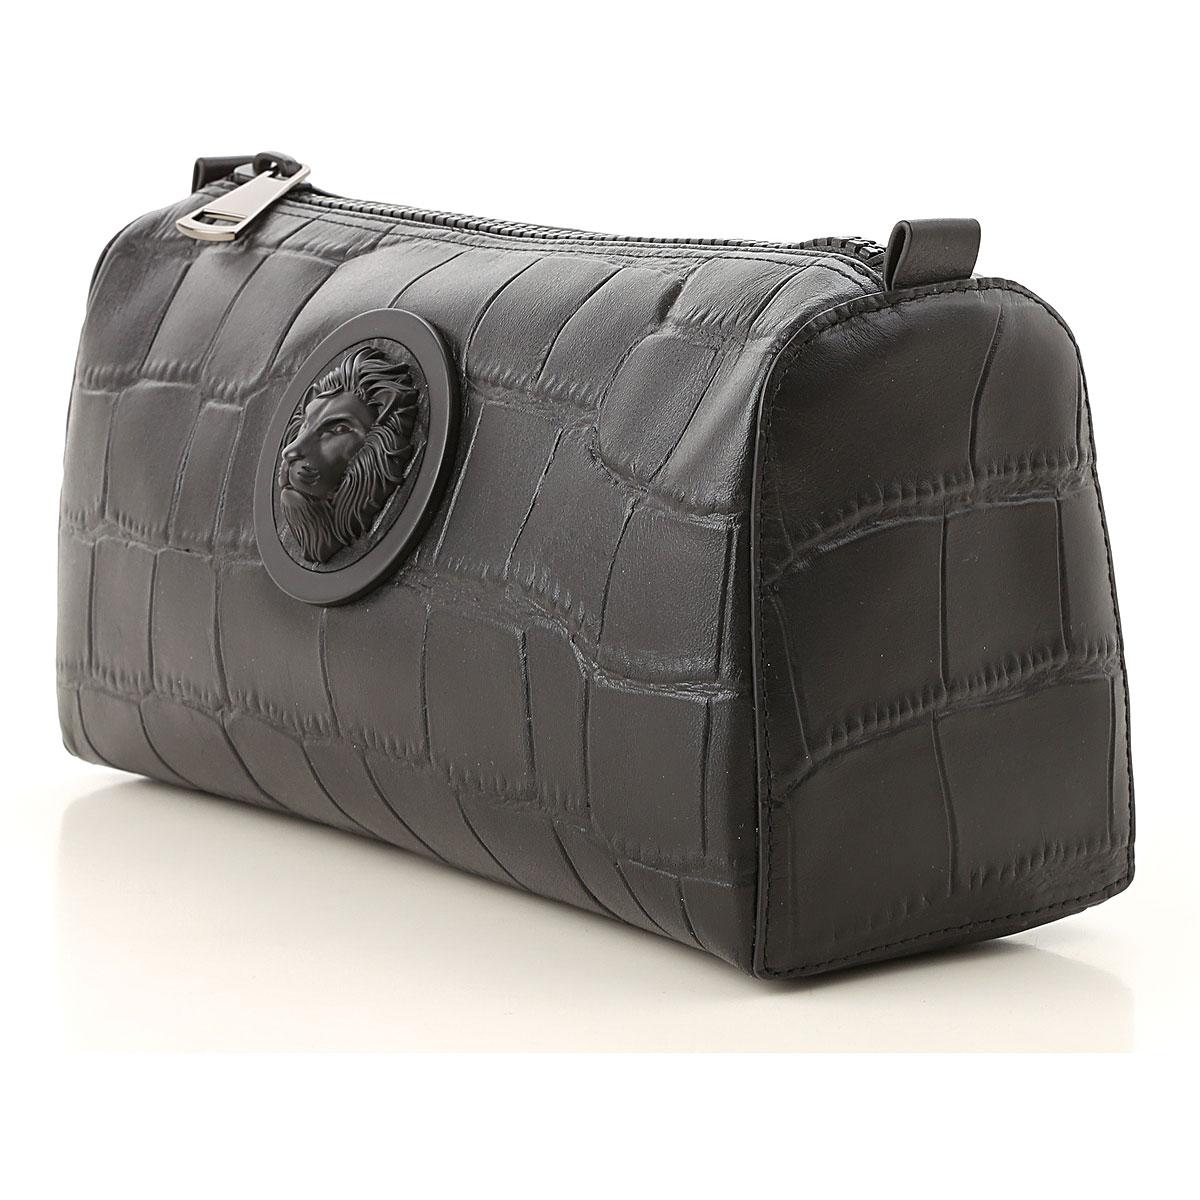 Put up with Frank Worthley Partial versace toiletry bag - rchavant.org.uk